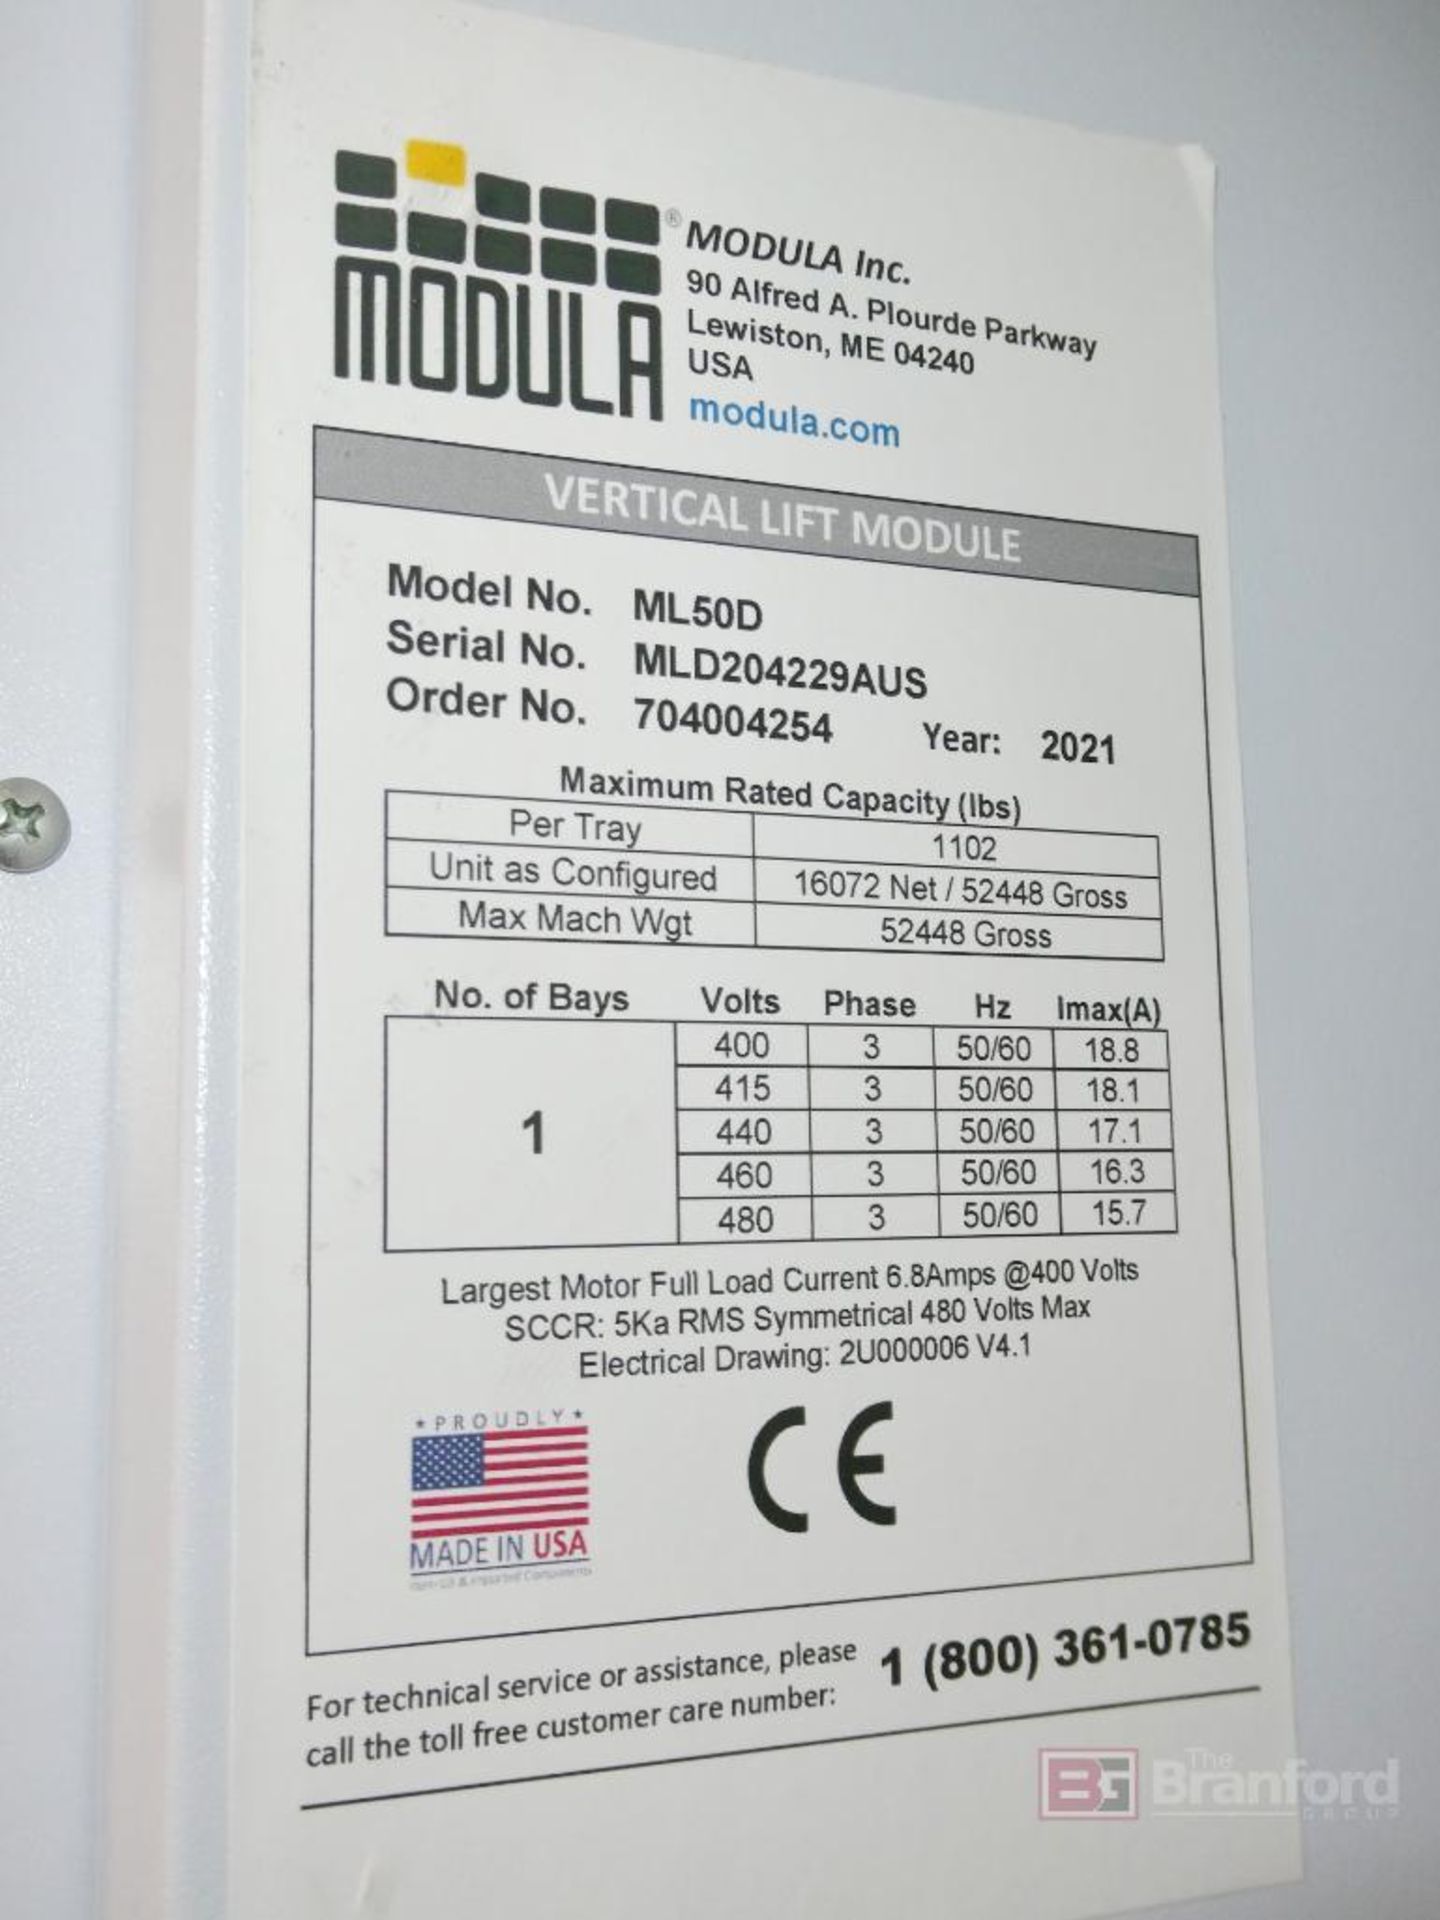 2021 Modula Lift Approx. Total Height 33'10" Model ML50D, Automated Vertical Storage System - Image 6 of 7